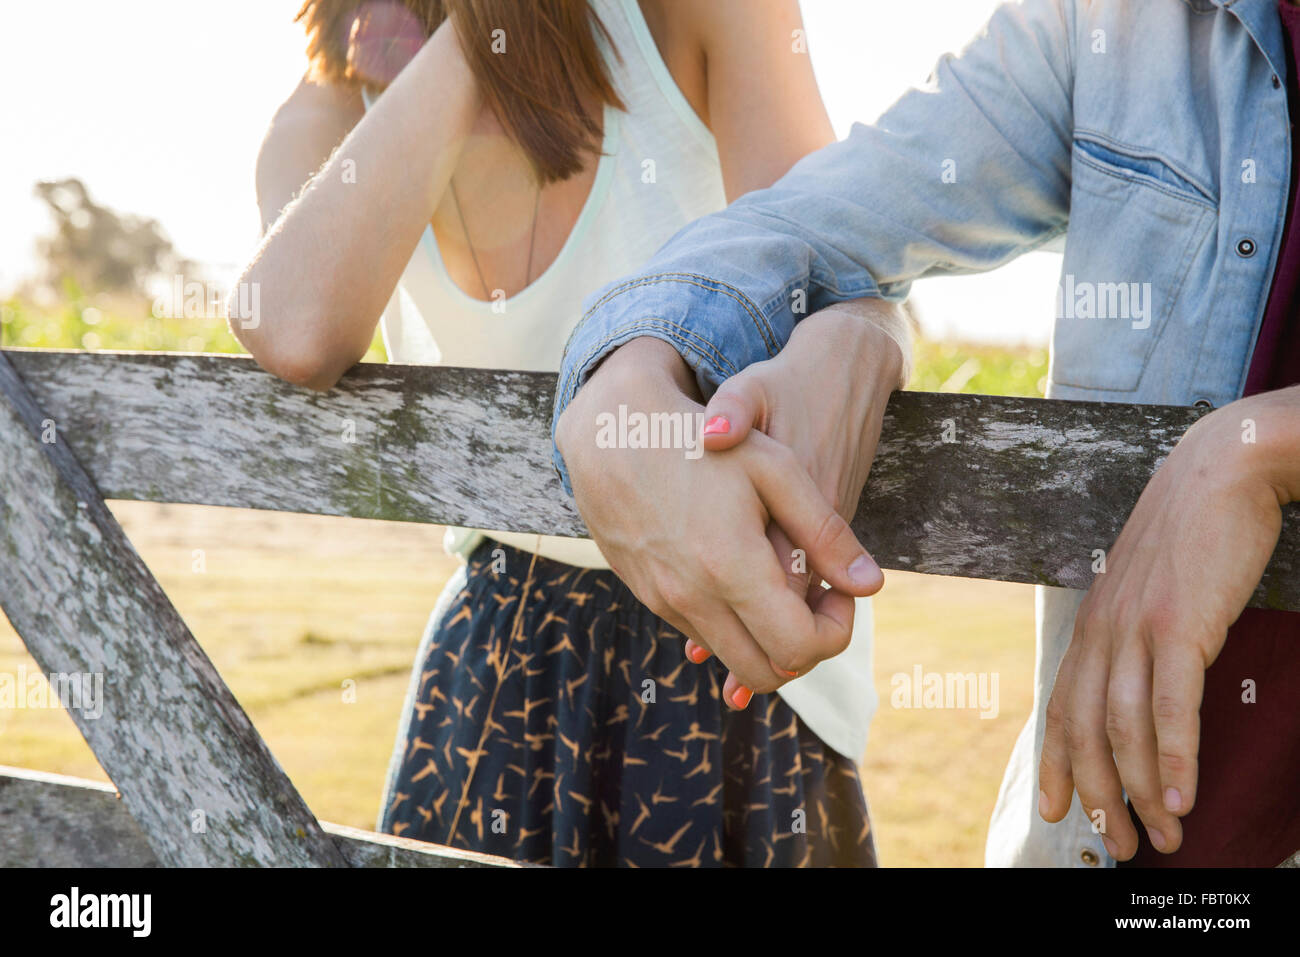 Coppia giovane Holding Hands, close-up Foto Stock